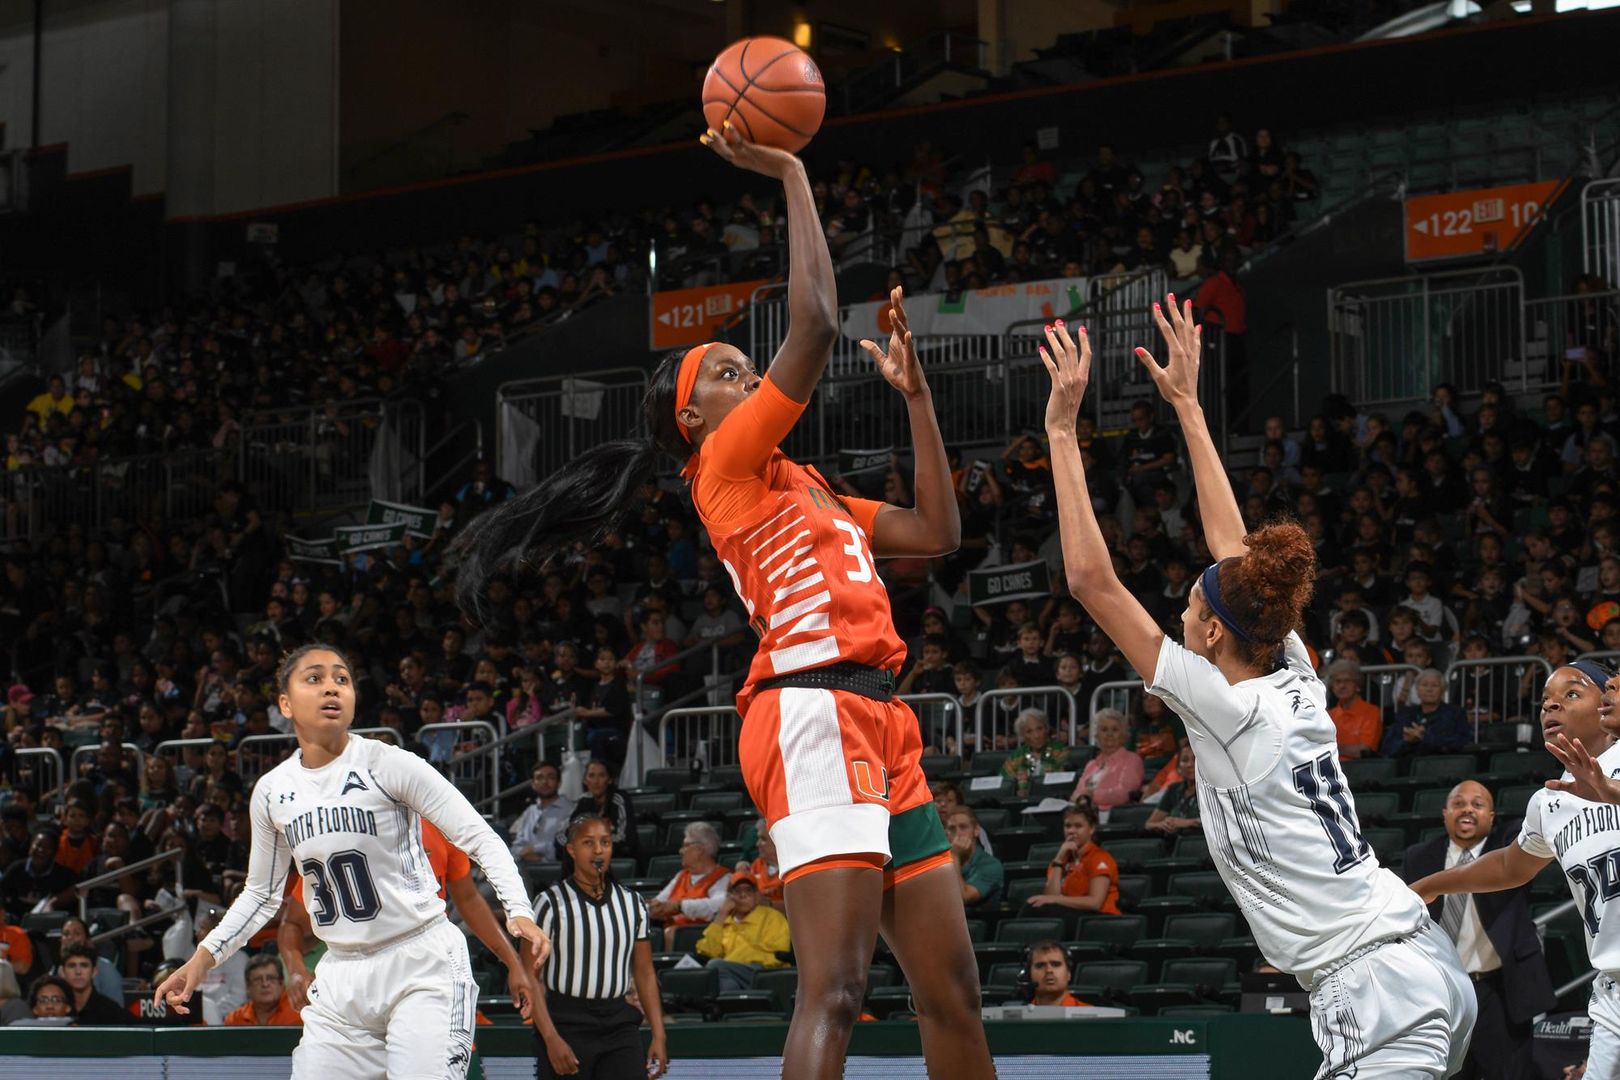 Canes Chat: Strong Second Half Lifts Canes Over UNF